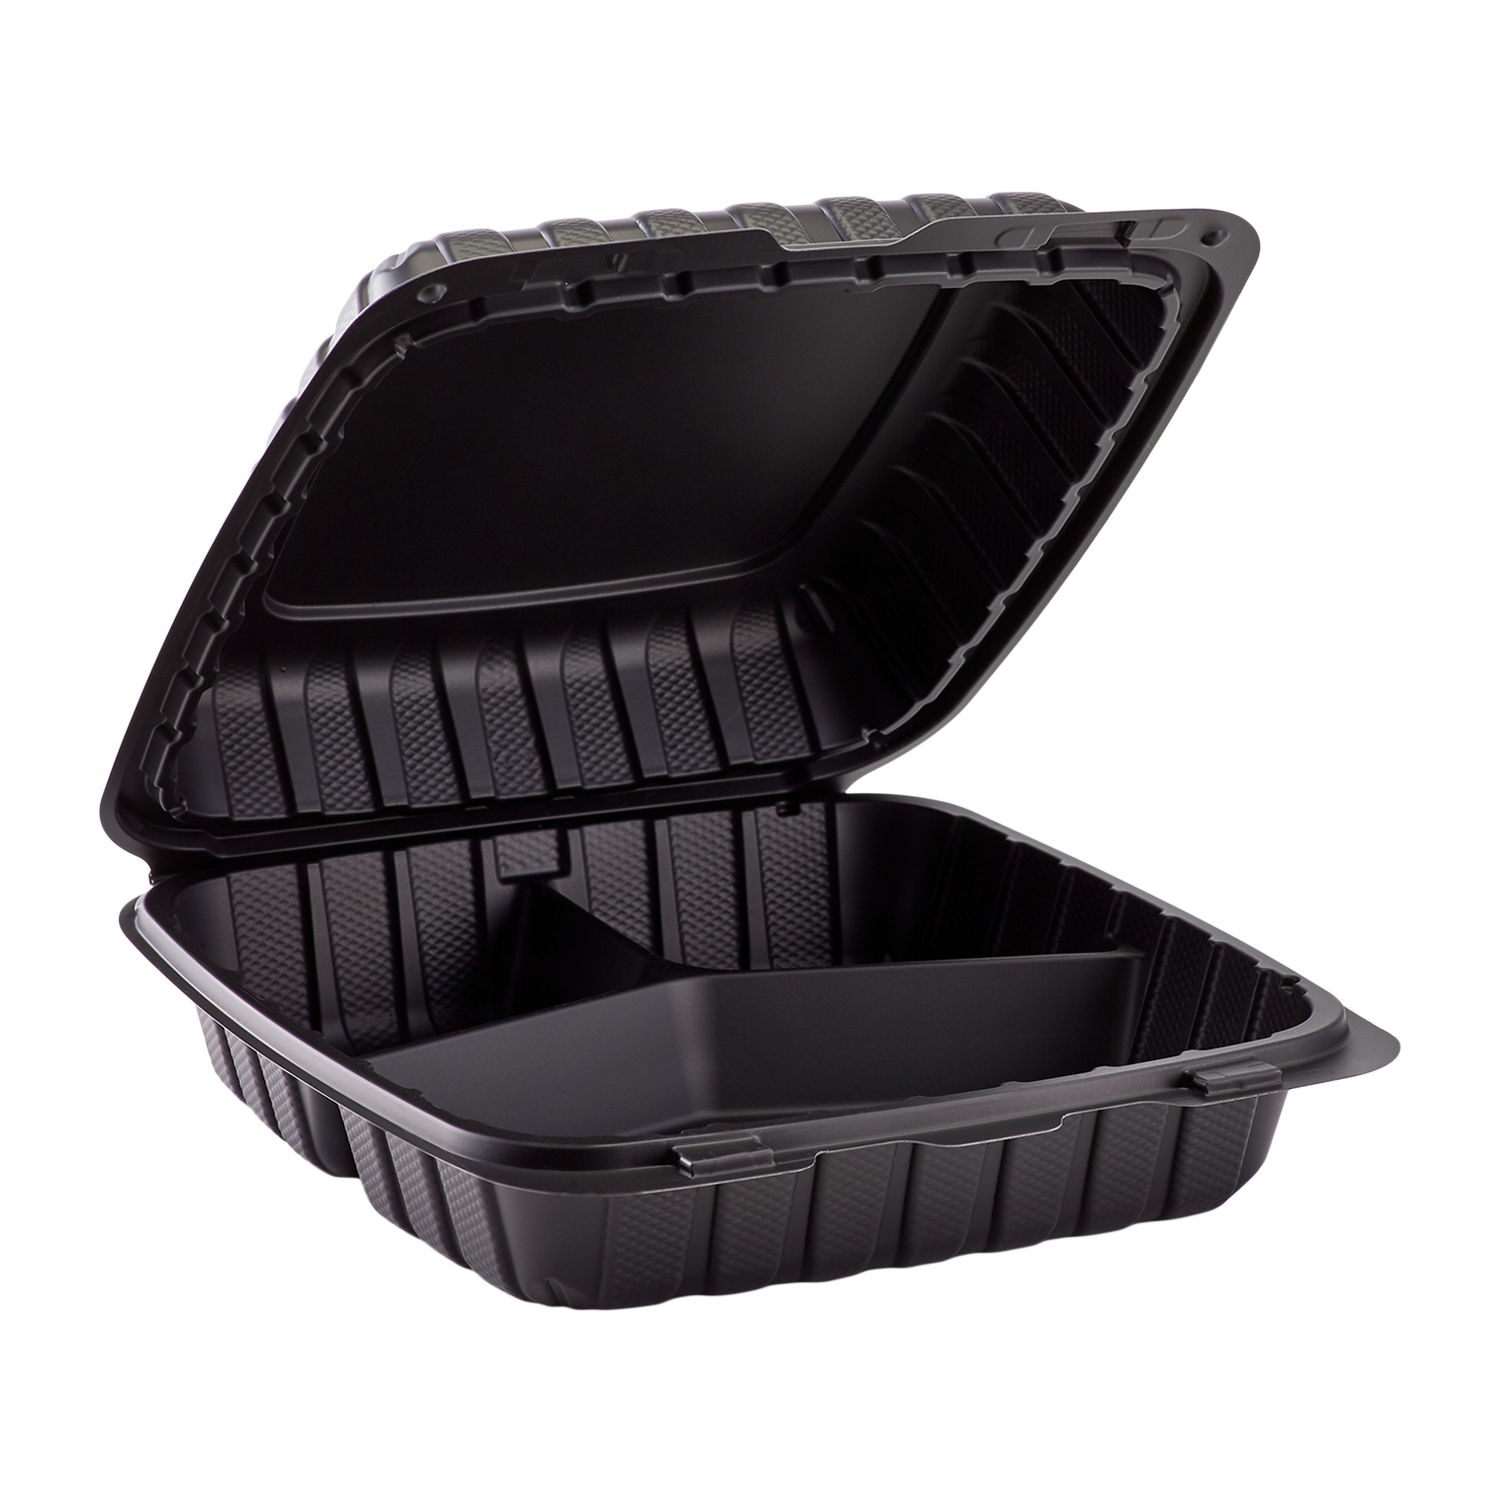 Karat Earth 9 inch x 9 inch Mineral Filled PP Hinged Container, 1 Compartment - Black - 120 ct, Size: 6